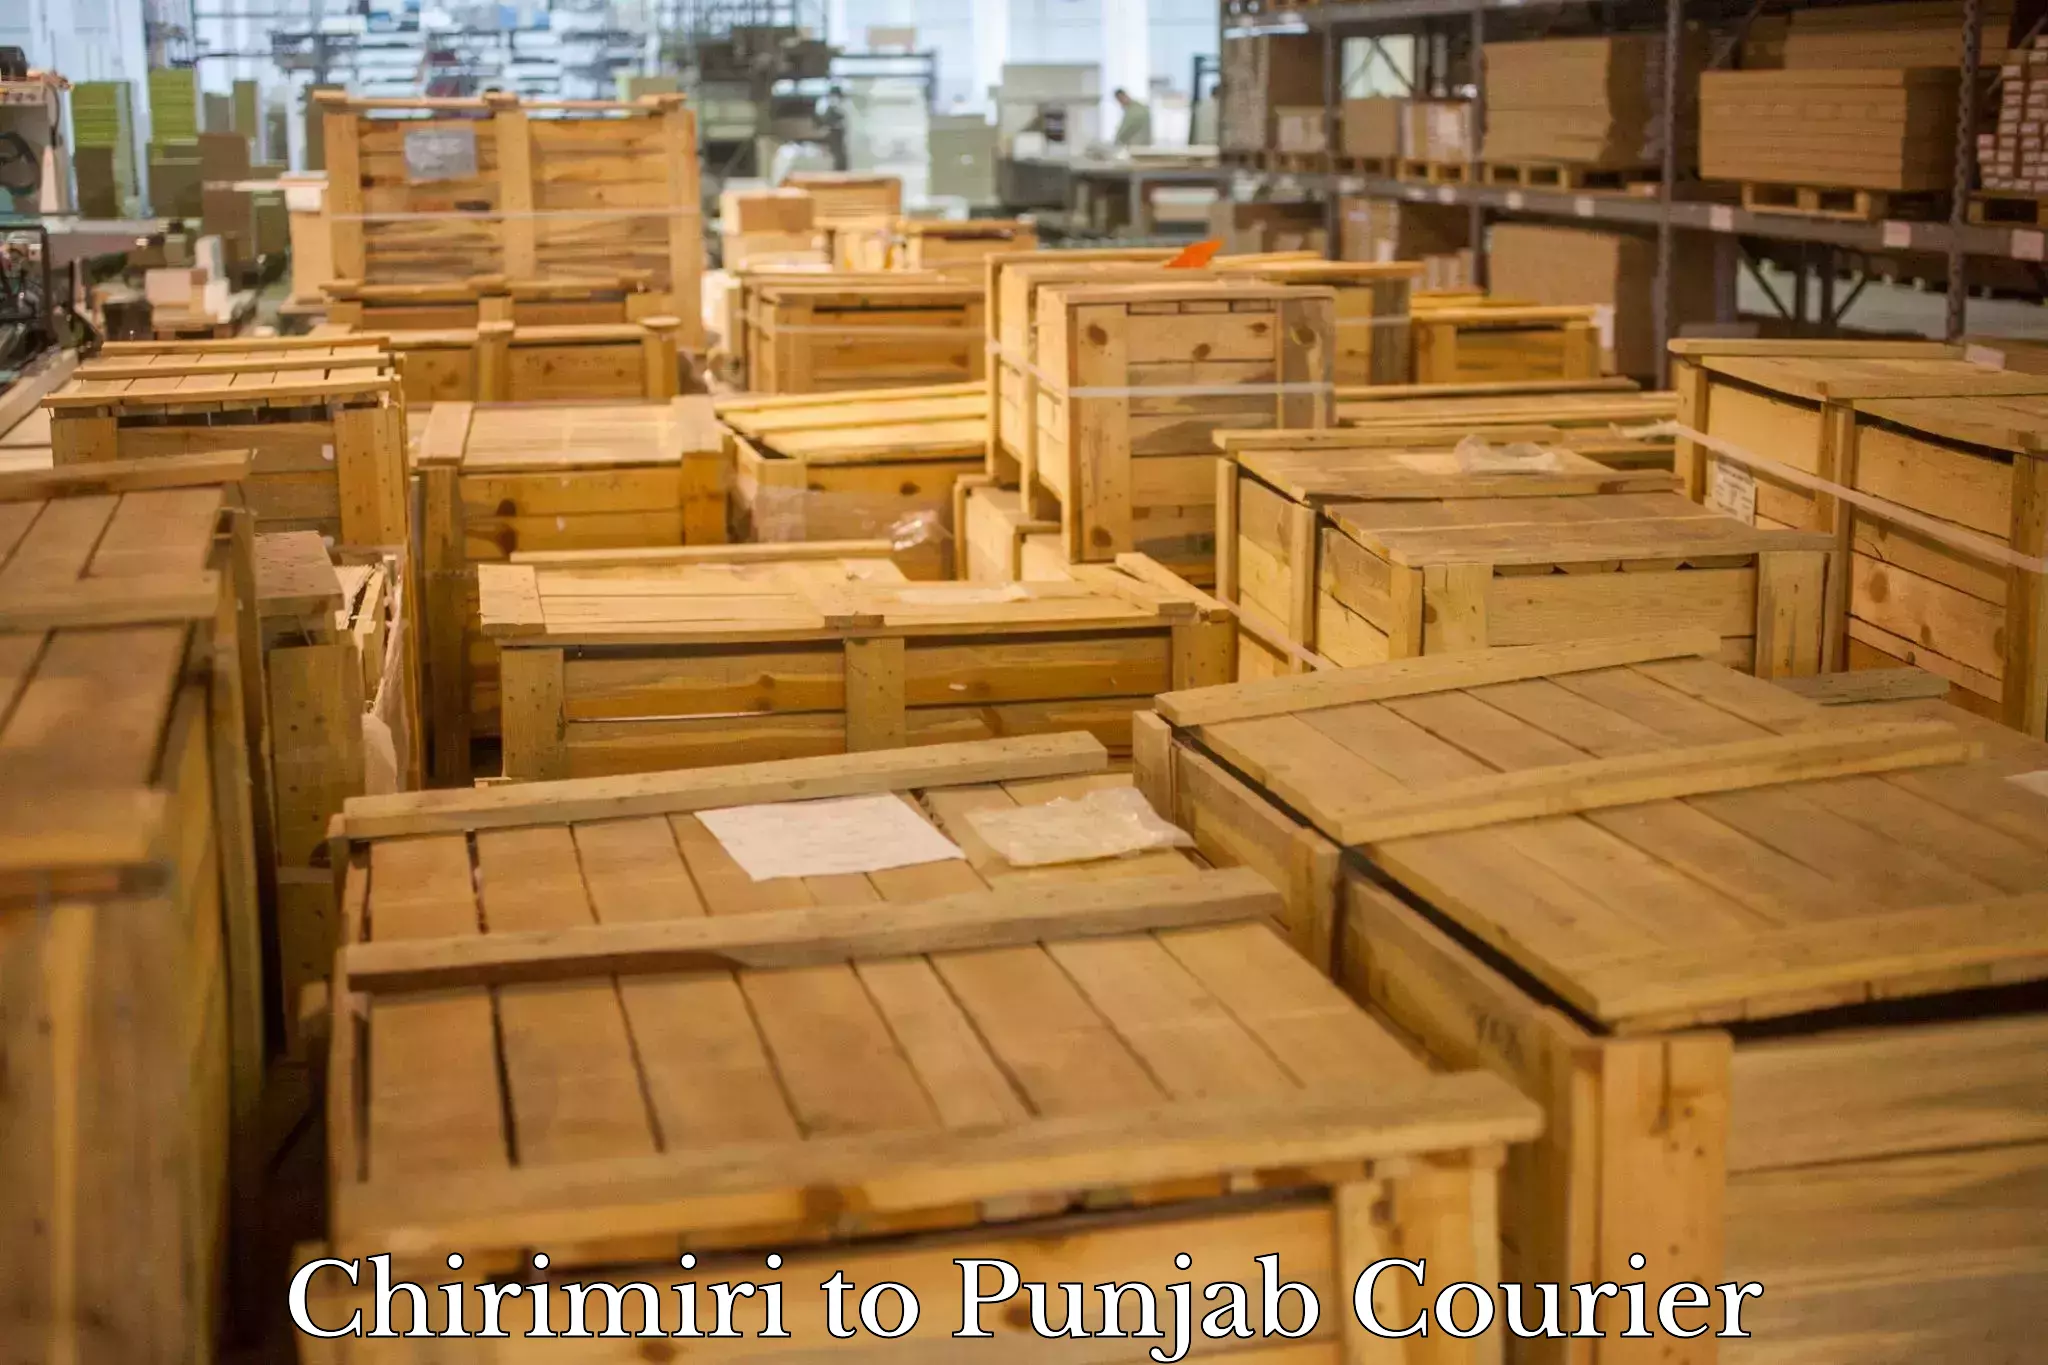 State-of-the-art courier technology Chirimiri to Punjab